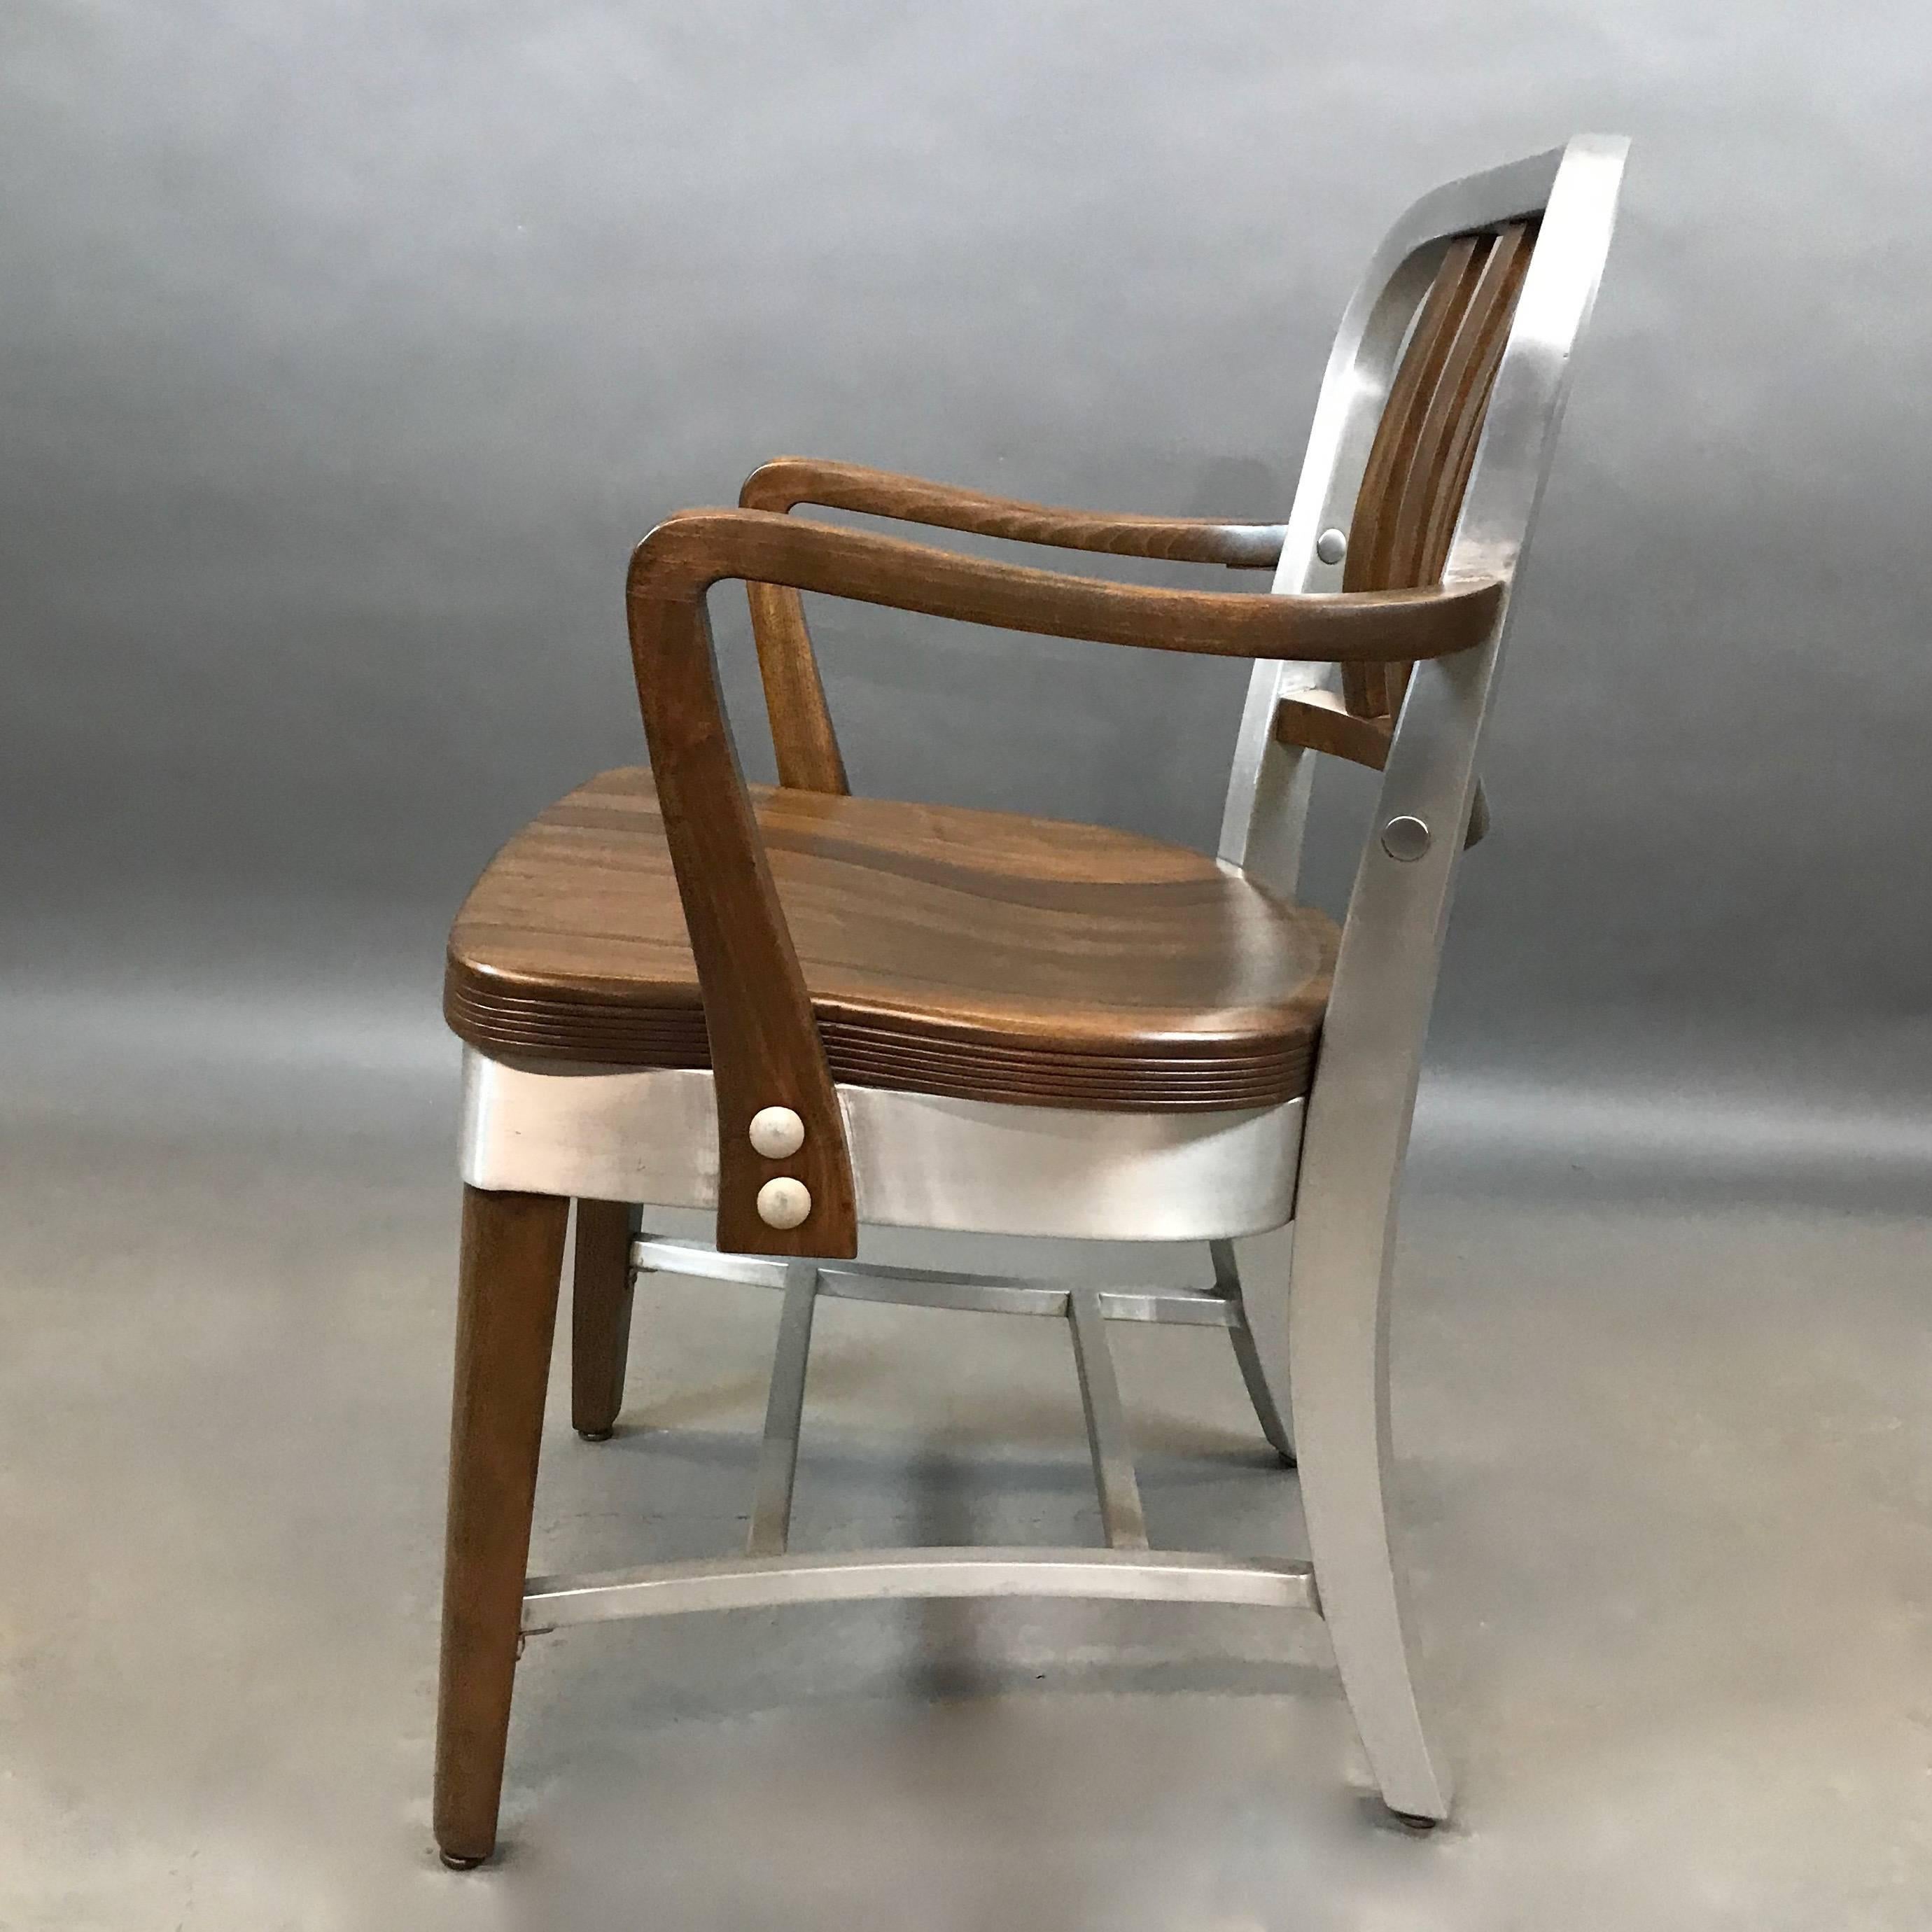 Classic, Shaw Walker armchair features a brushed aluminum frame with maple seat, arms, front legs and slat backrest. We have a variety of Shaw Walker chairs listed separately.